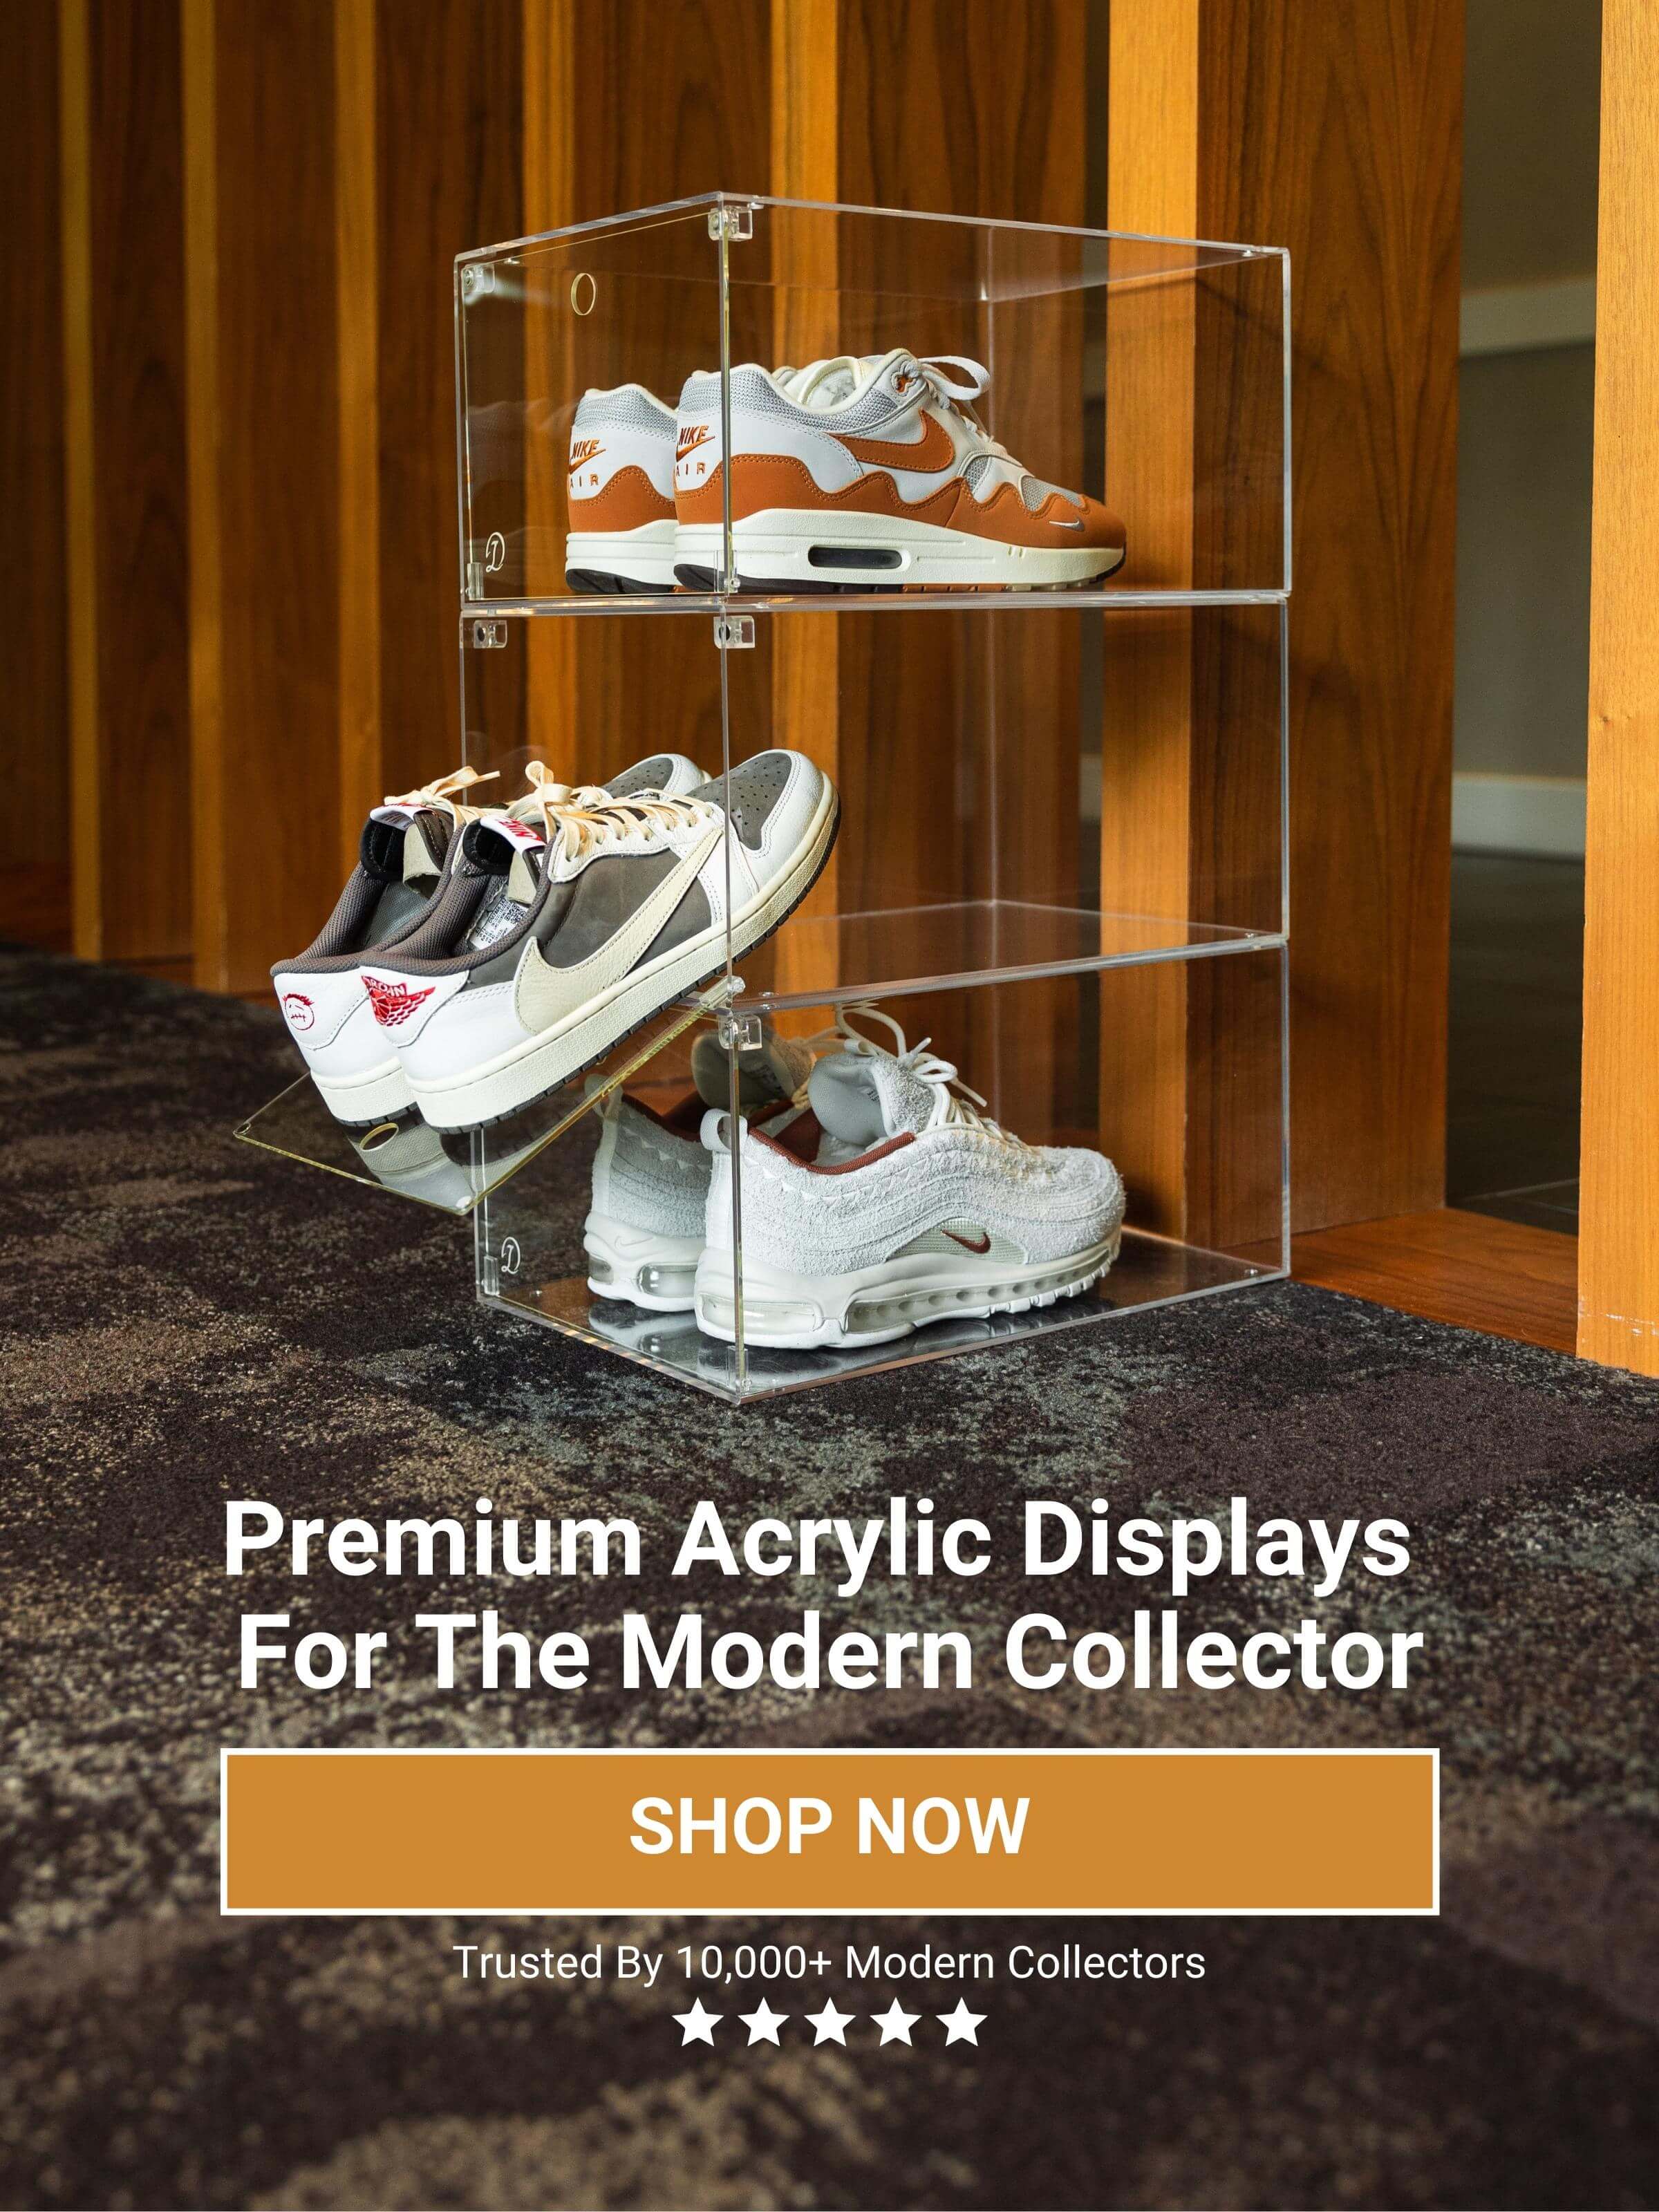 Looksee Designs - Premium Acrylic Displays For The Modern Collector